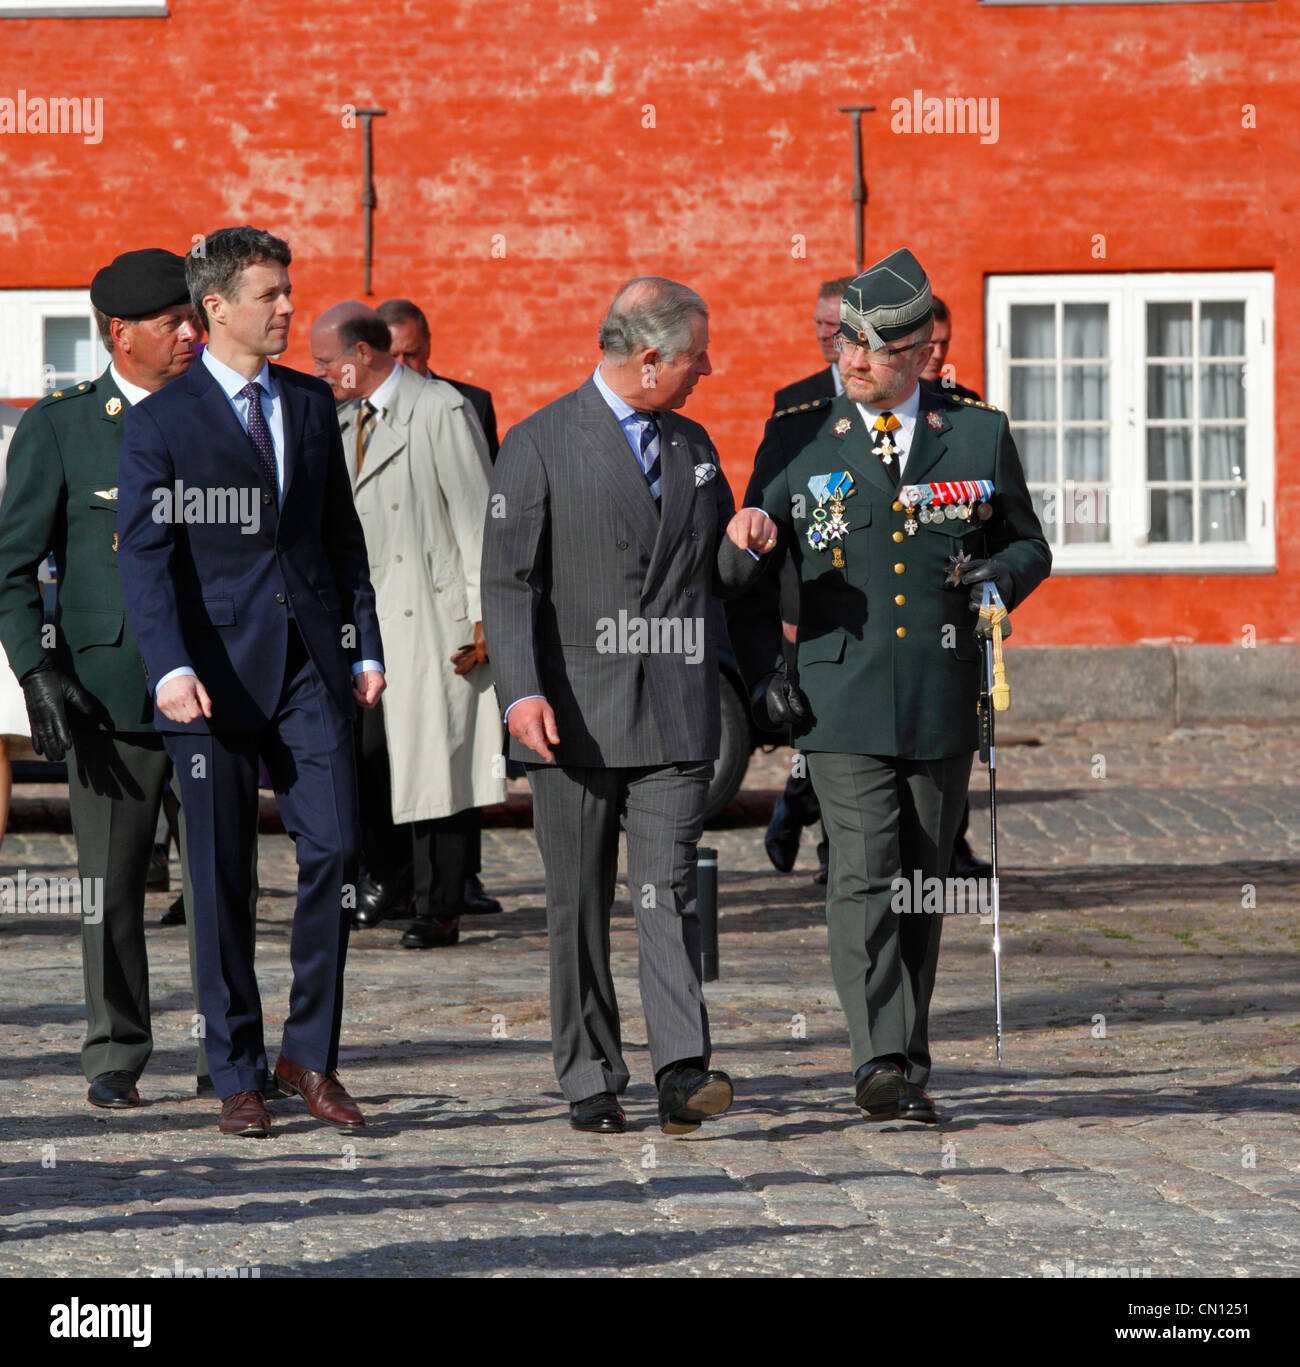 Prince Charles and prince Frederik arriving at the citadel Kastellet in Copenhagen, Denmark, guided by Colonel Lasse Harkjær Stock Photo